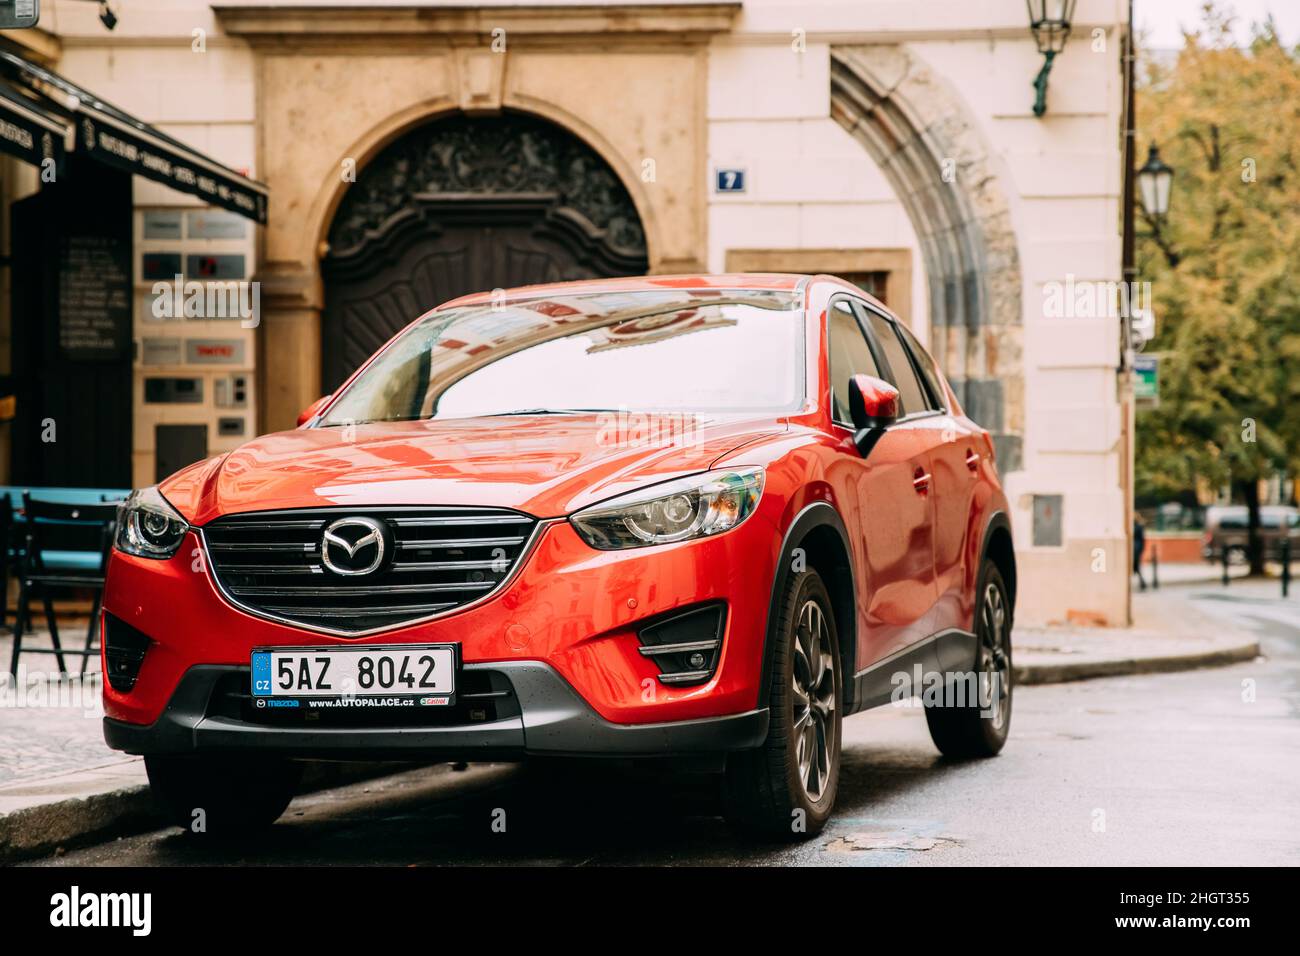 Front View Of Red Facelift Mazda Cx-5 Car Parked In Street. Stock Photo